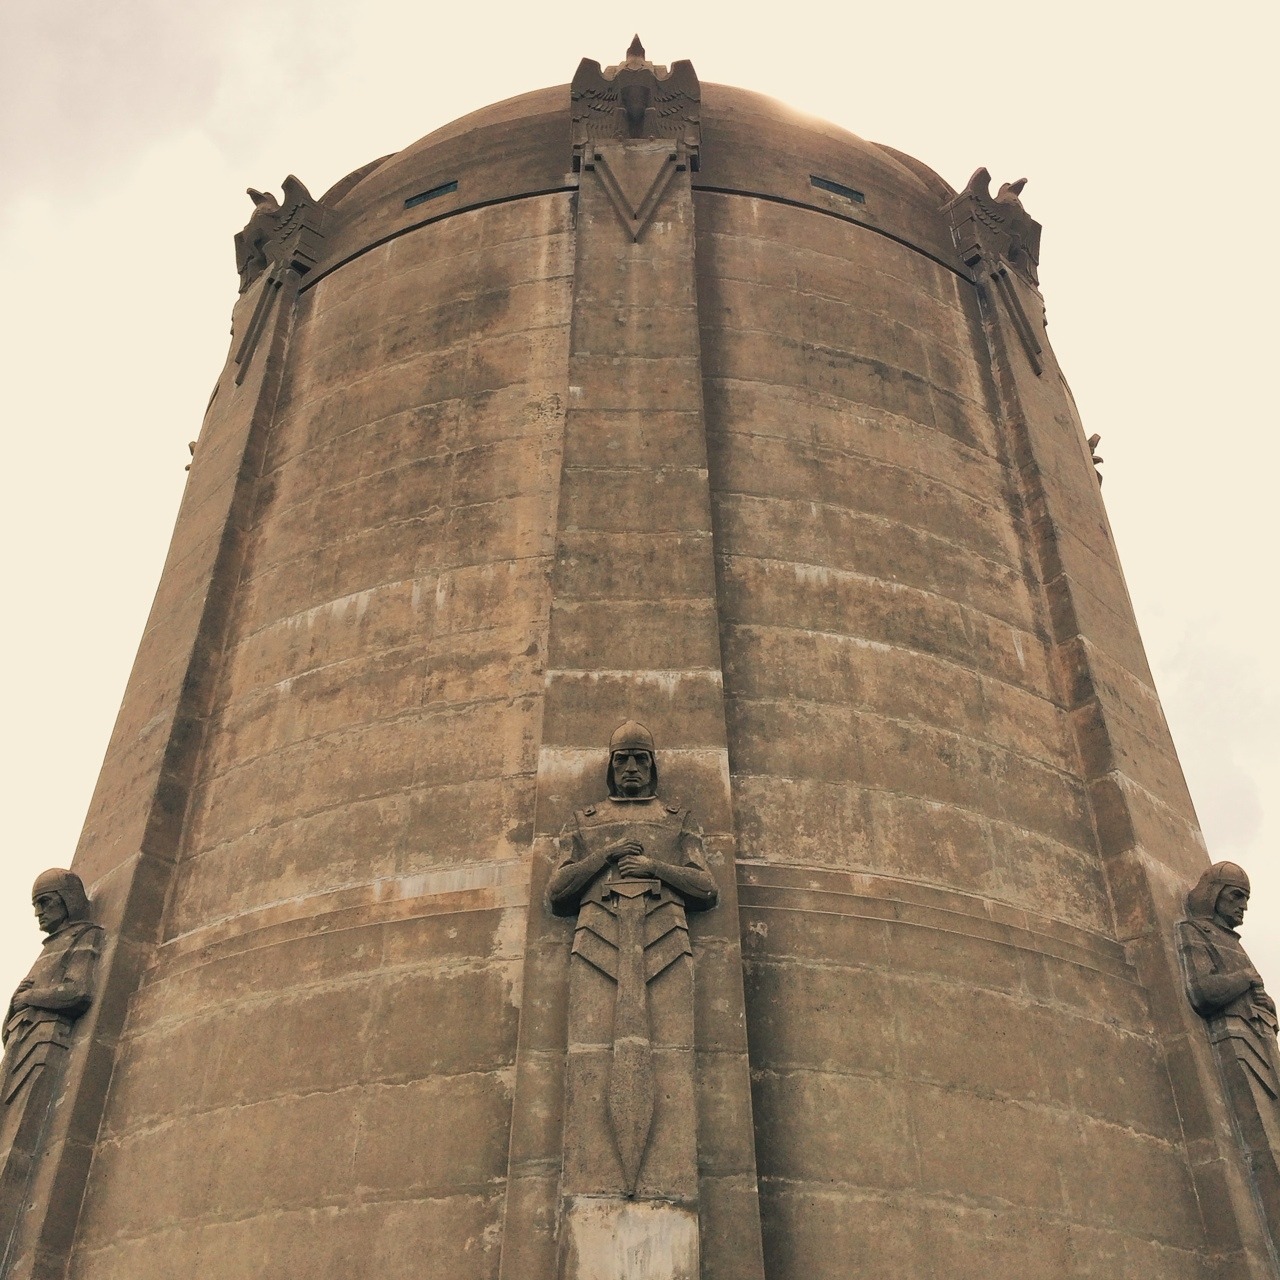 http://scttdvd.com/post/89689734792/the-washburn-park-water-tower